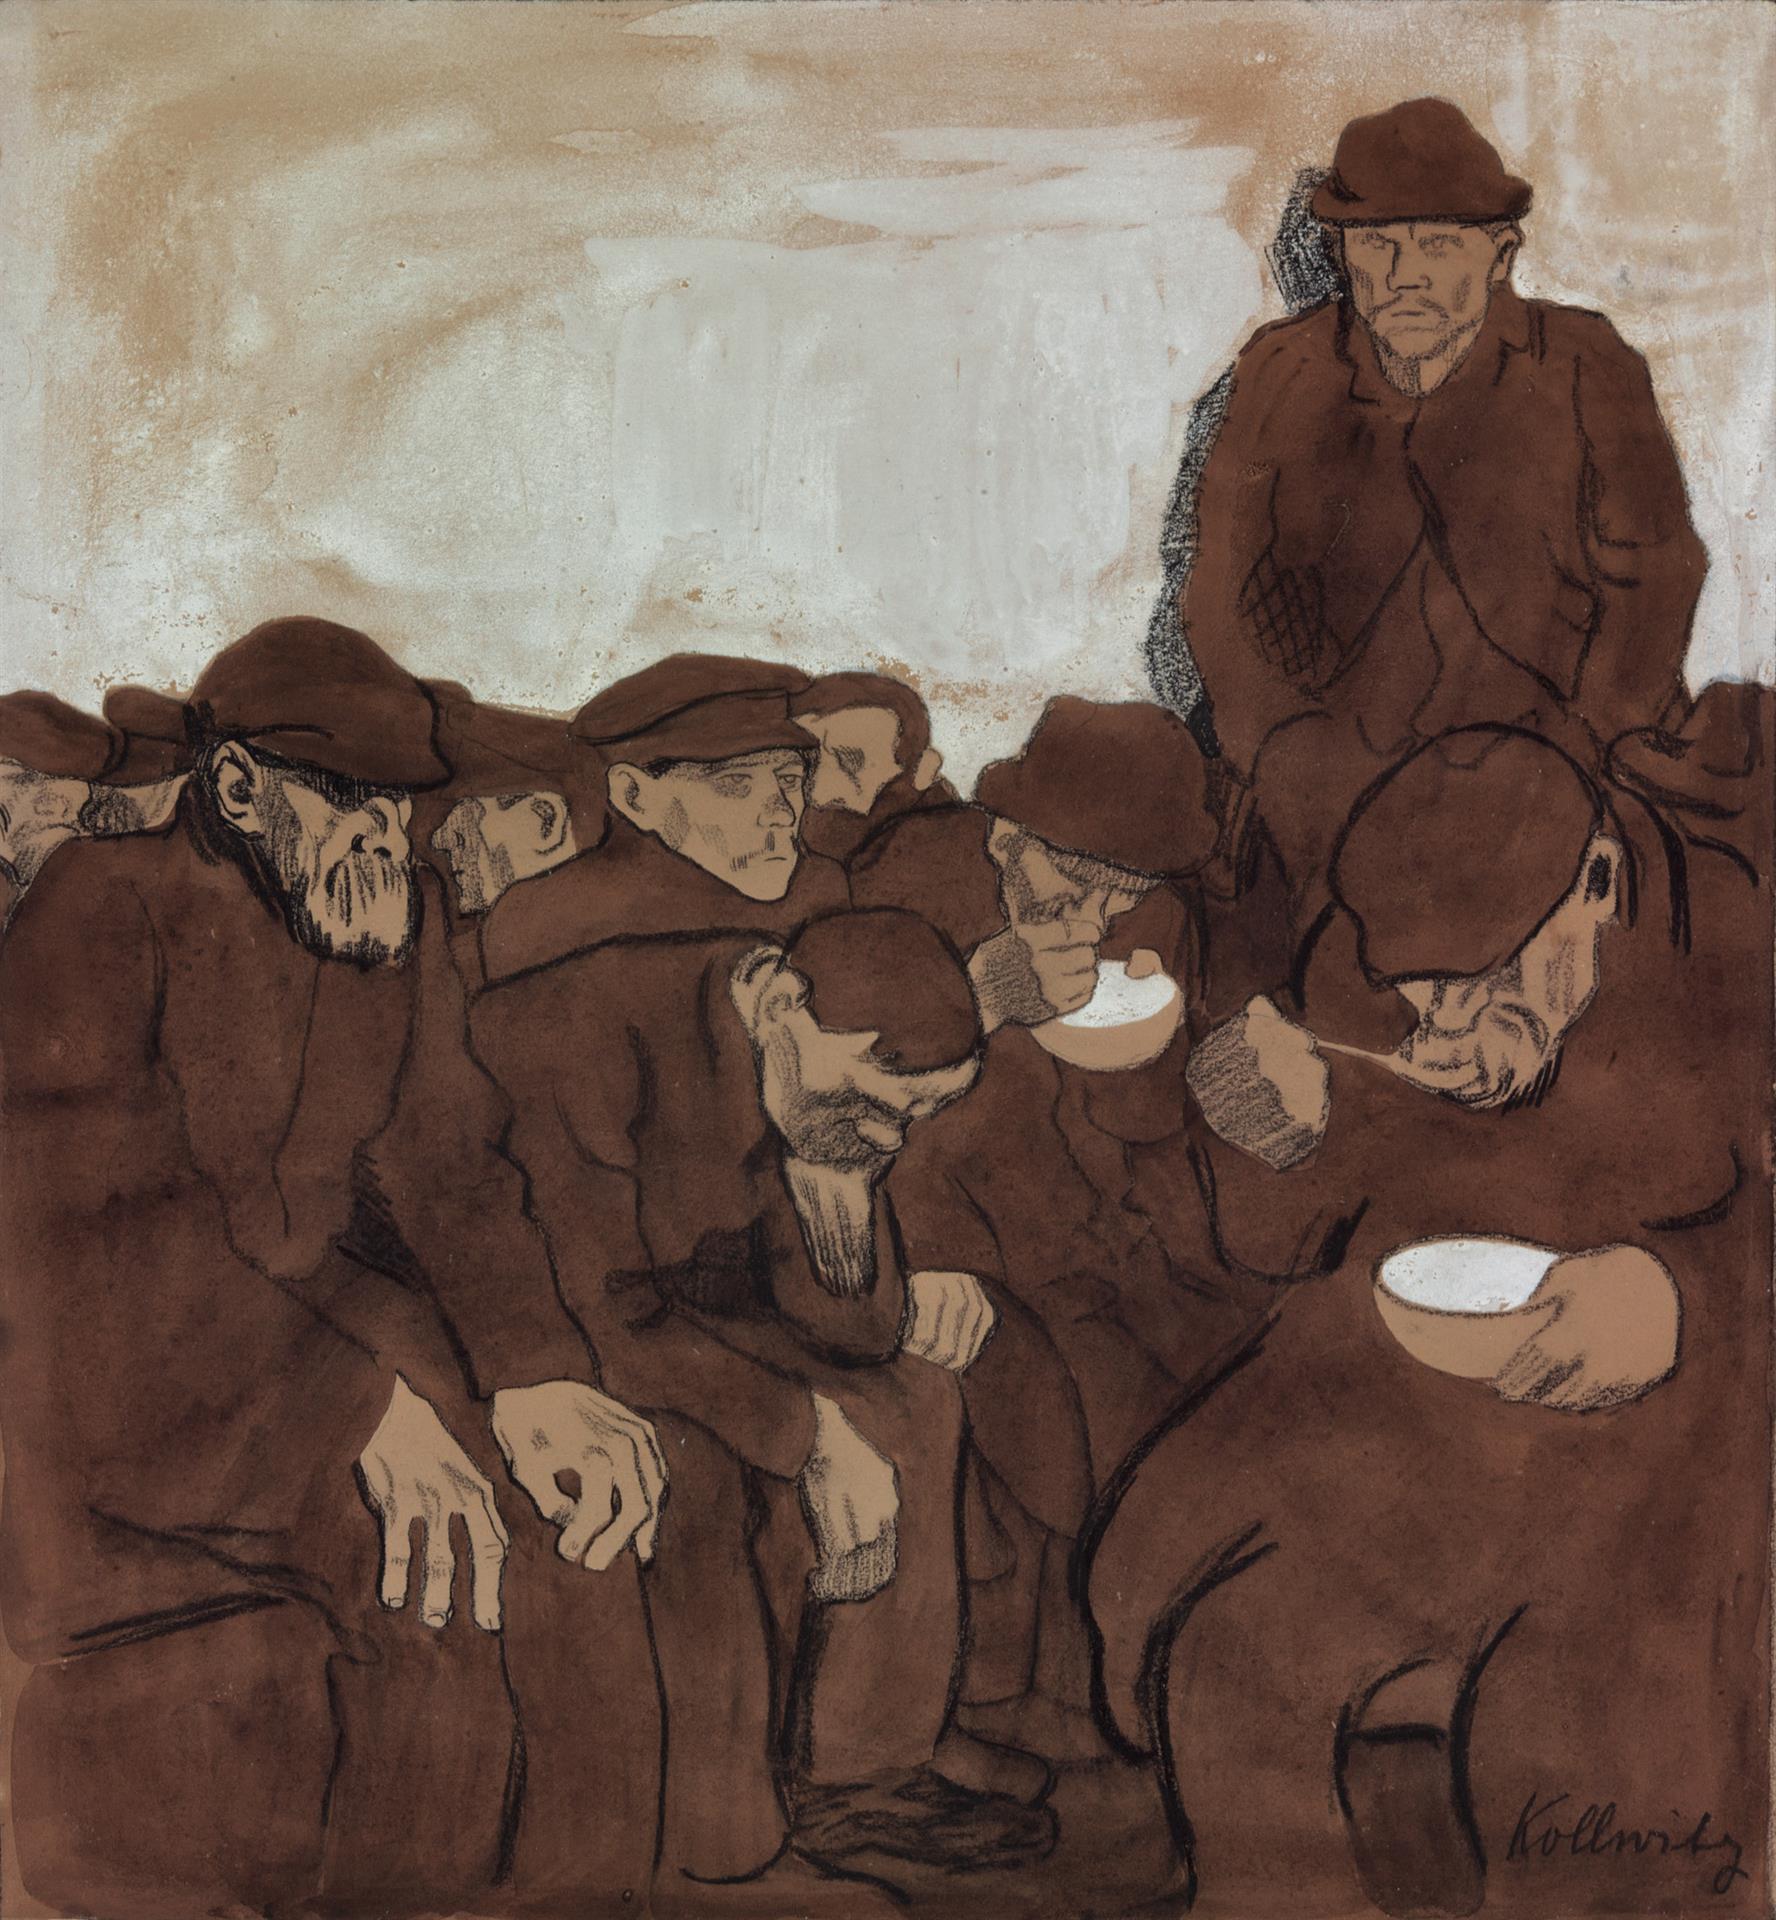 Käthe Kollwitz, Warm Shelter, 1908/1909, black crayon, pen and brush with ink and sepia on olive-green paper, white highlights in the background, NT (469a), Cologne Kollwitz Collection © Käthe Kollwitz Museum Köln